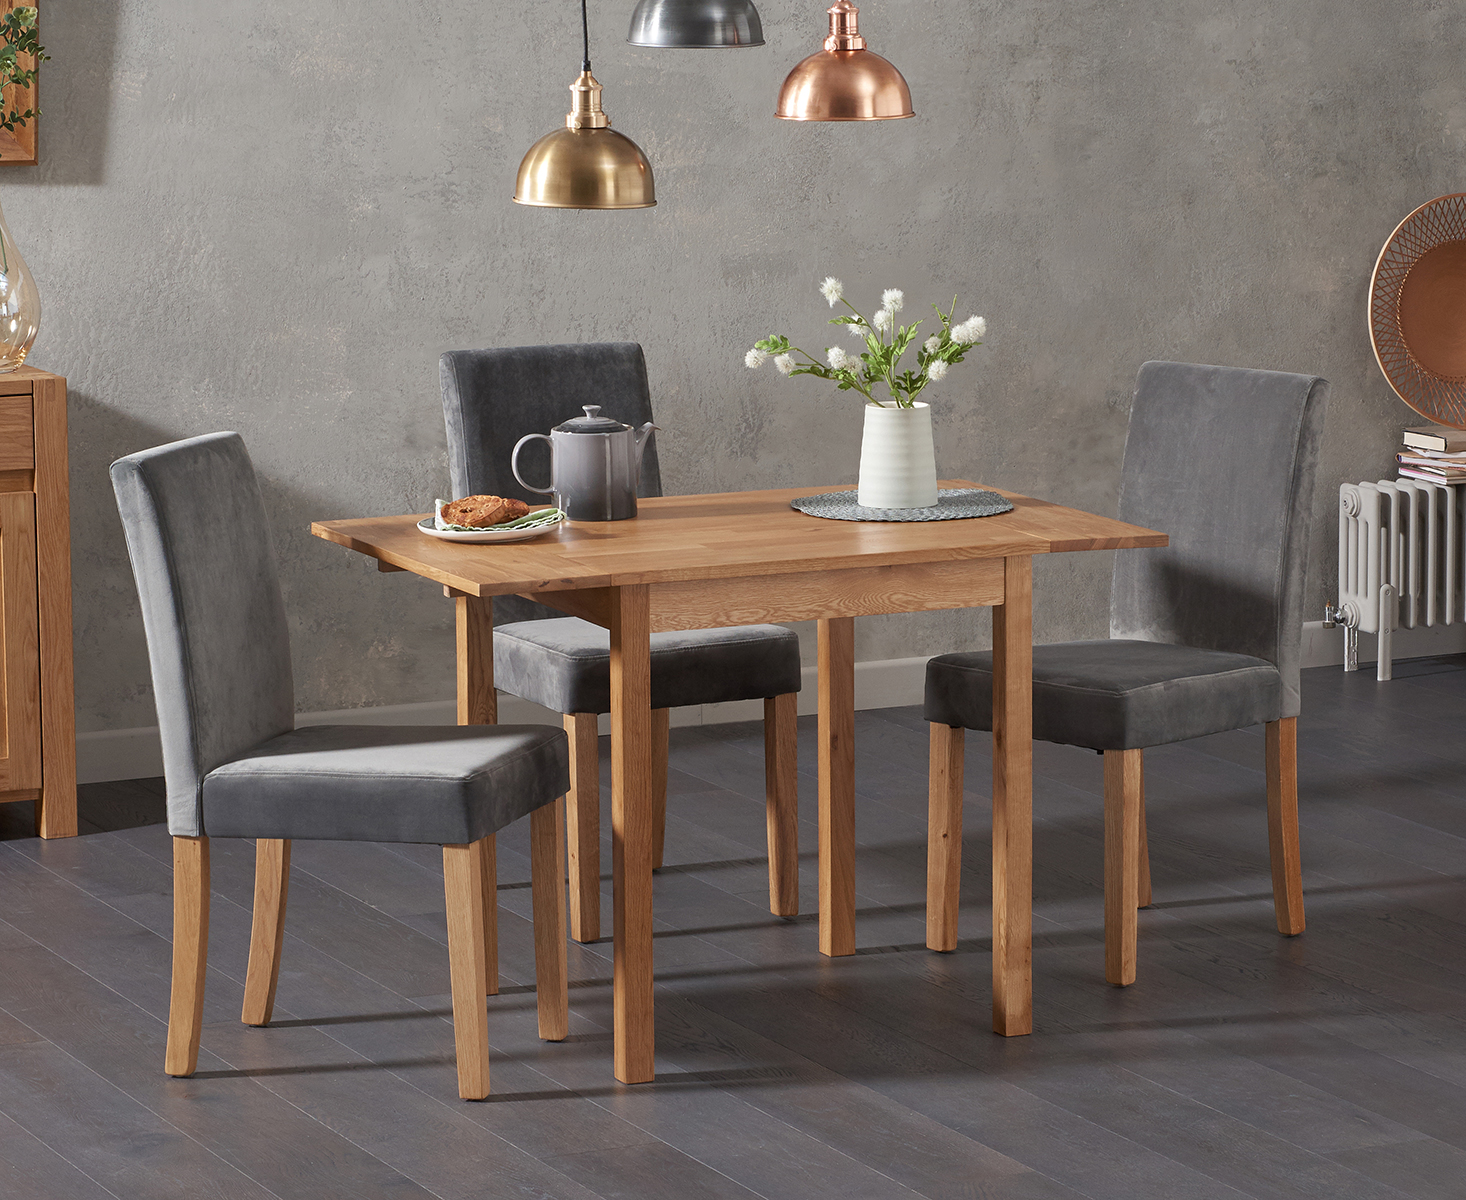 Oxford 70cm Solid Oak Extending Dining Table With 2 Grey Lila Plush Grey Chairs